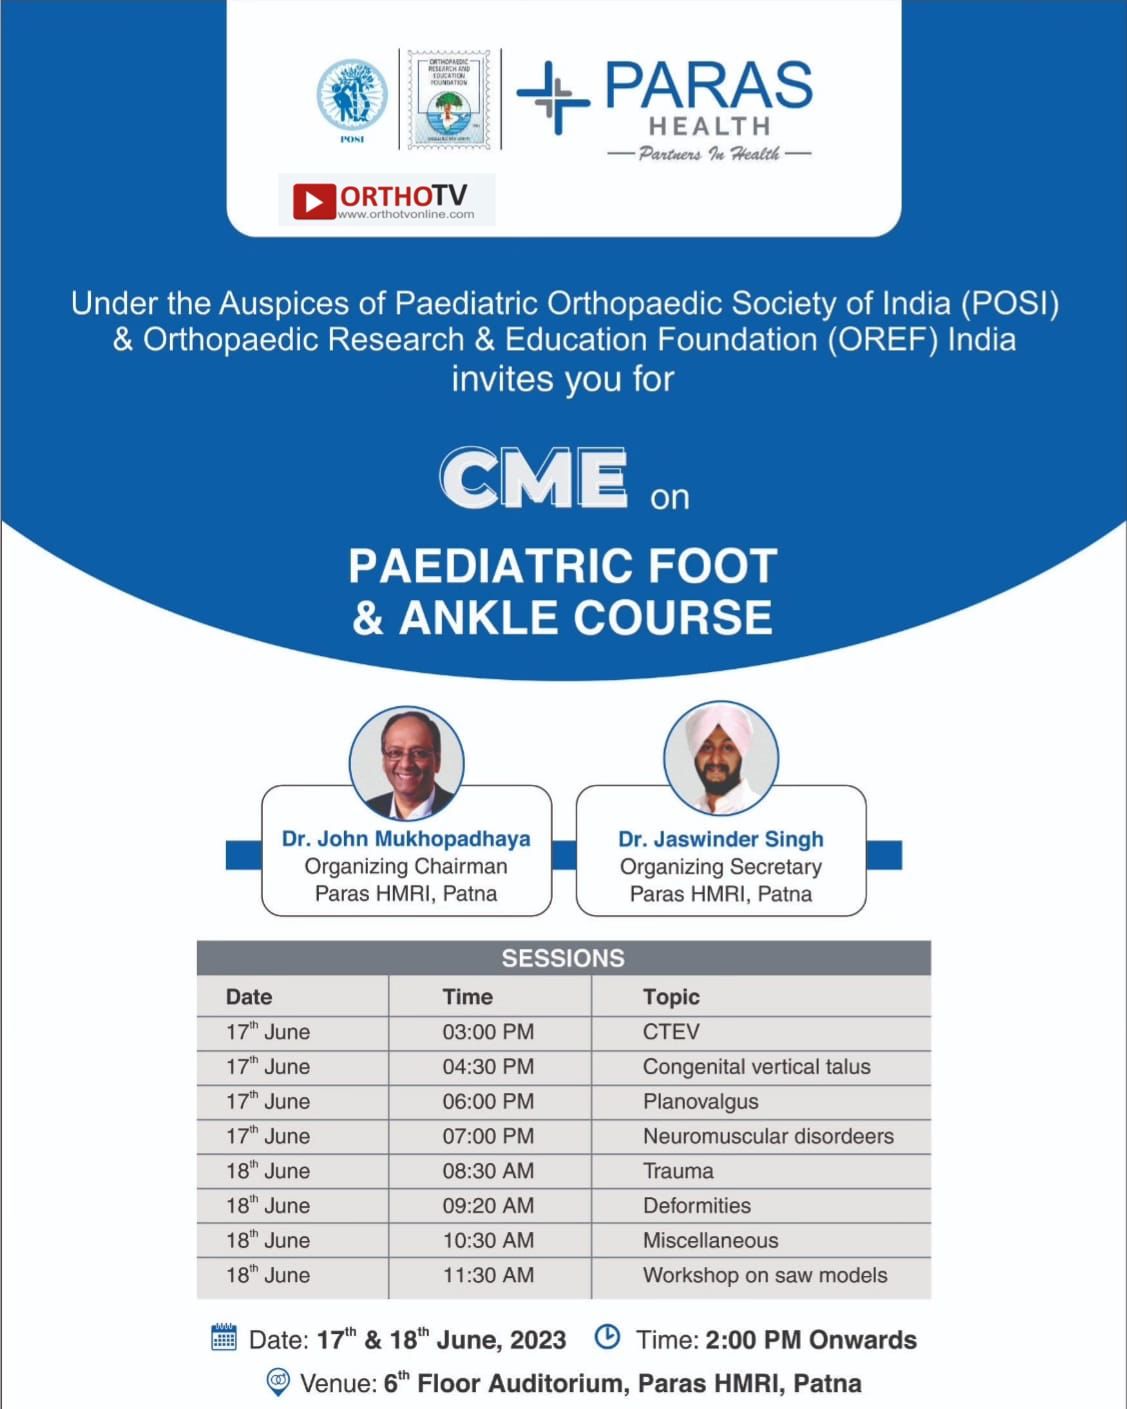 Under the Auspices of Pediatric Orthopedic Society of India (POSI) & Orthopaedic Research & Education Foundation (OREF) India invites you for CME